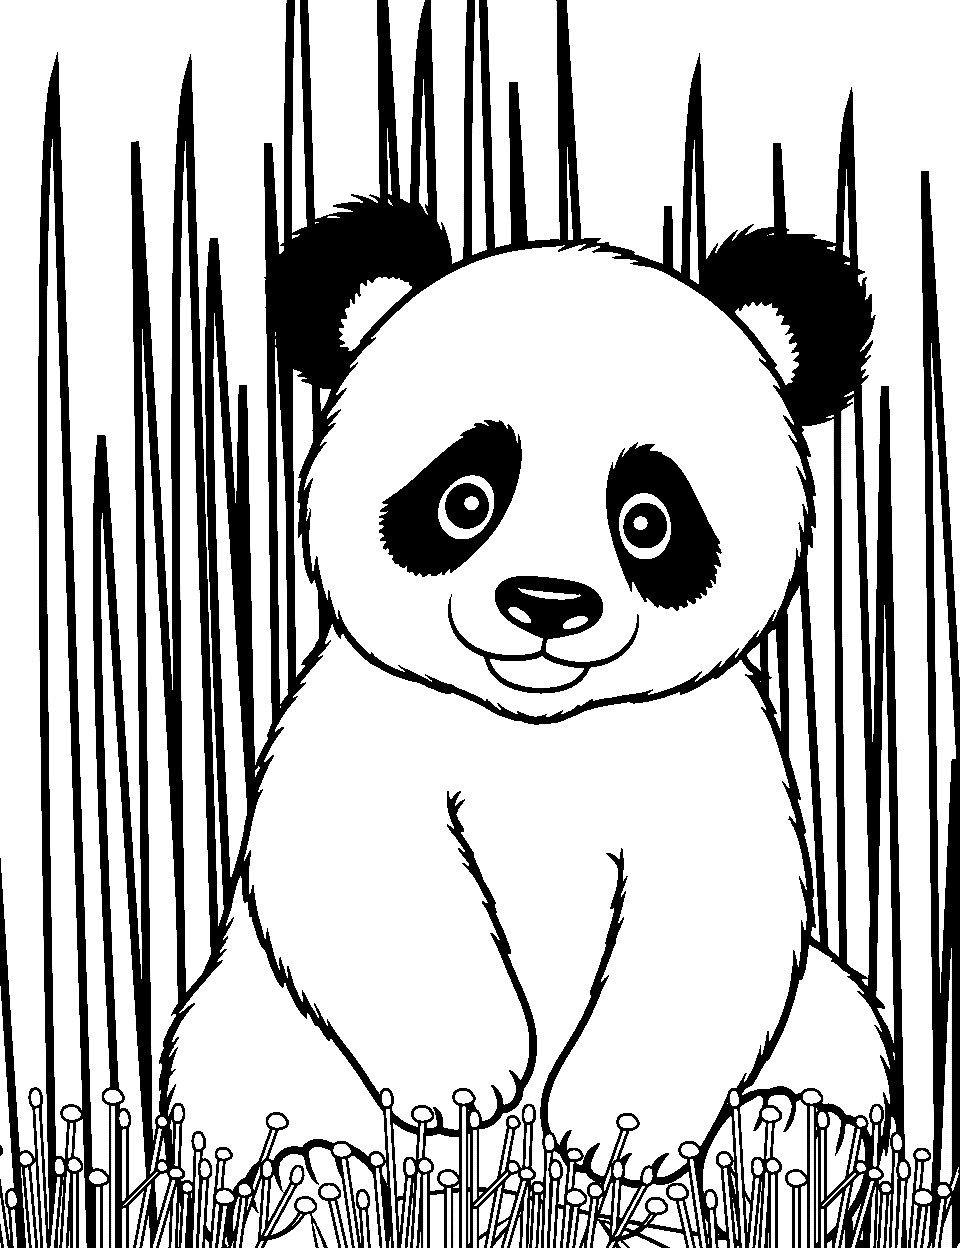 Panda in a Meadow Coloring Page - A peaceful panda strolling leisurely through a lush, tranquil meadow.